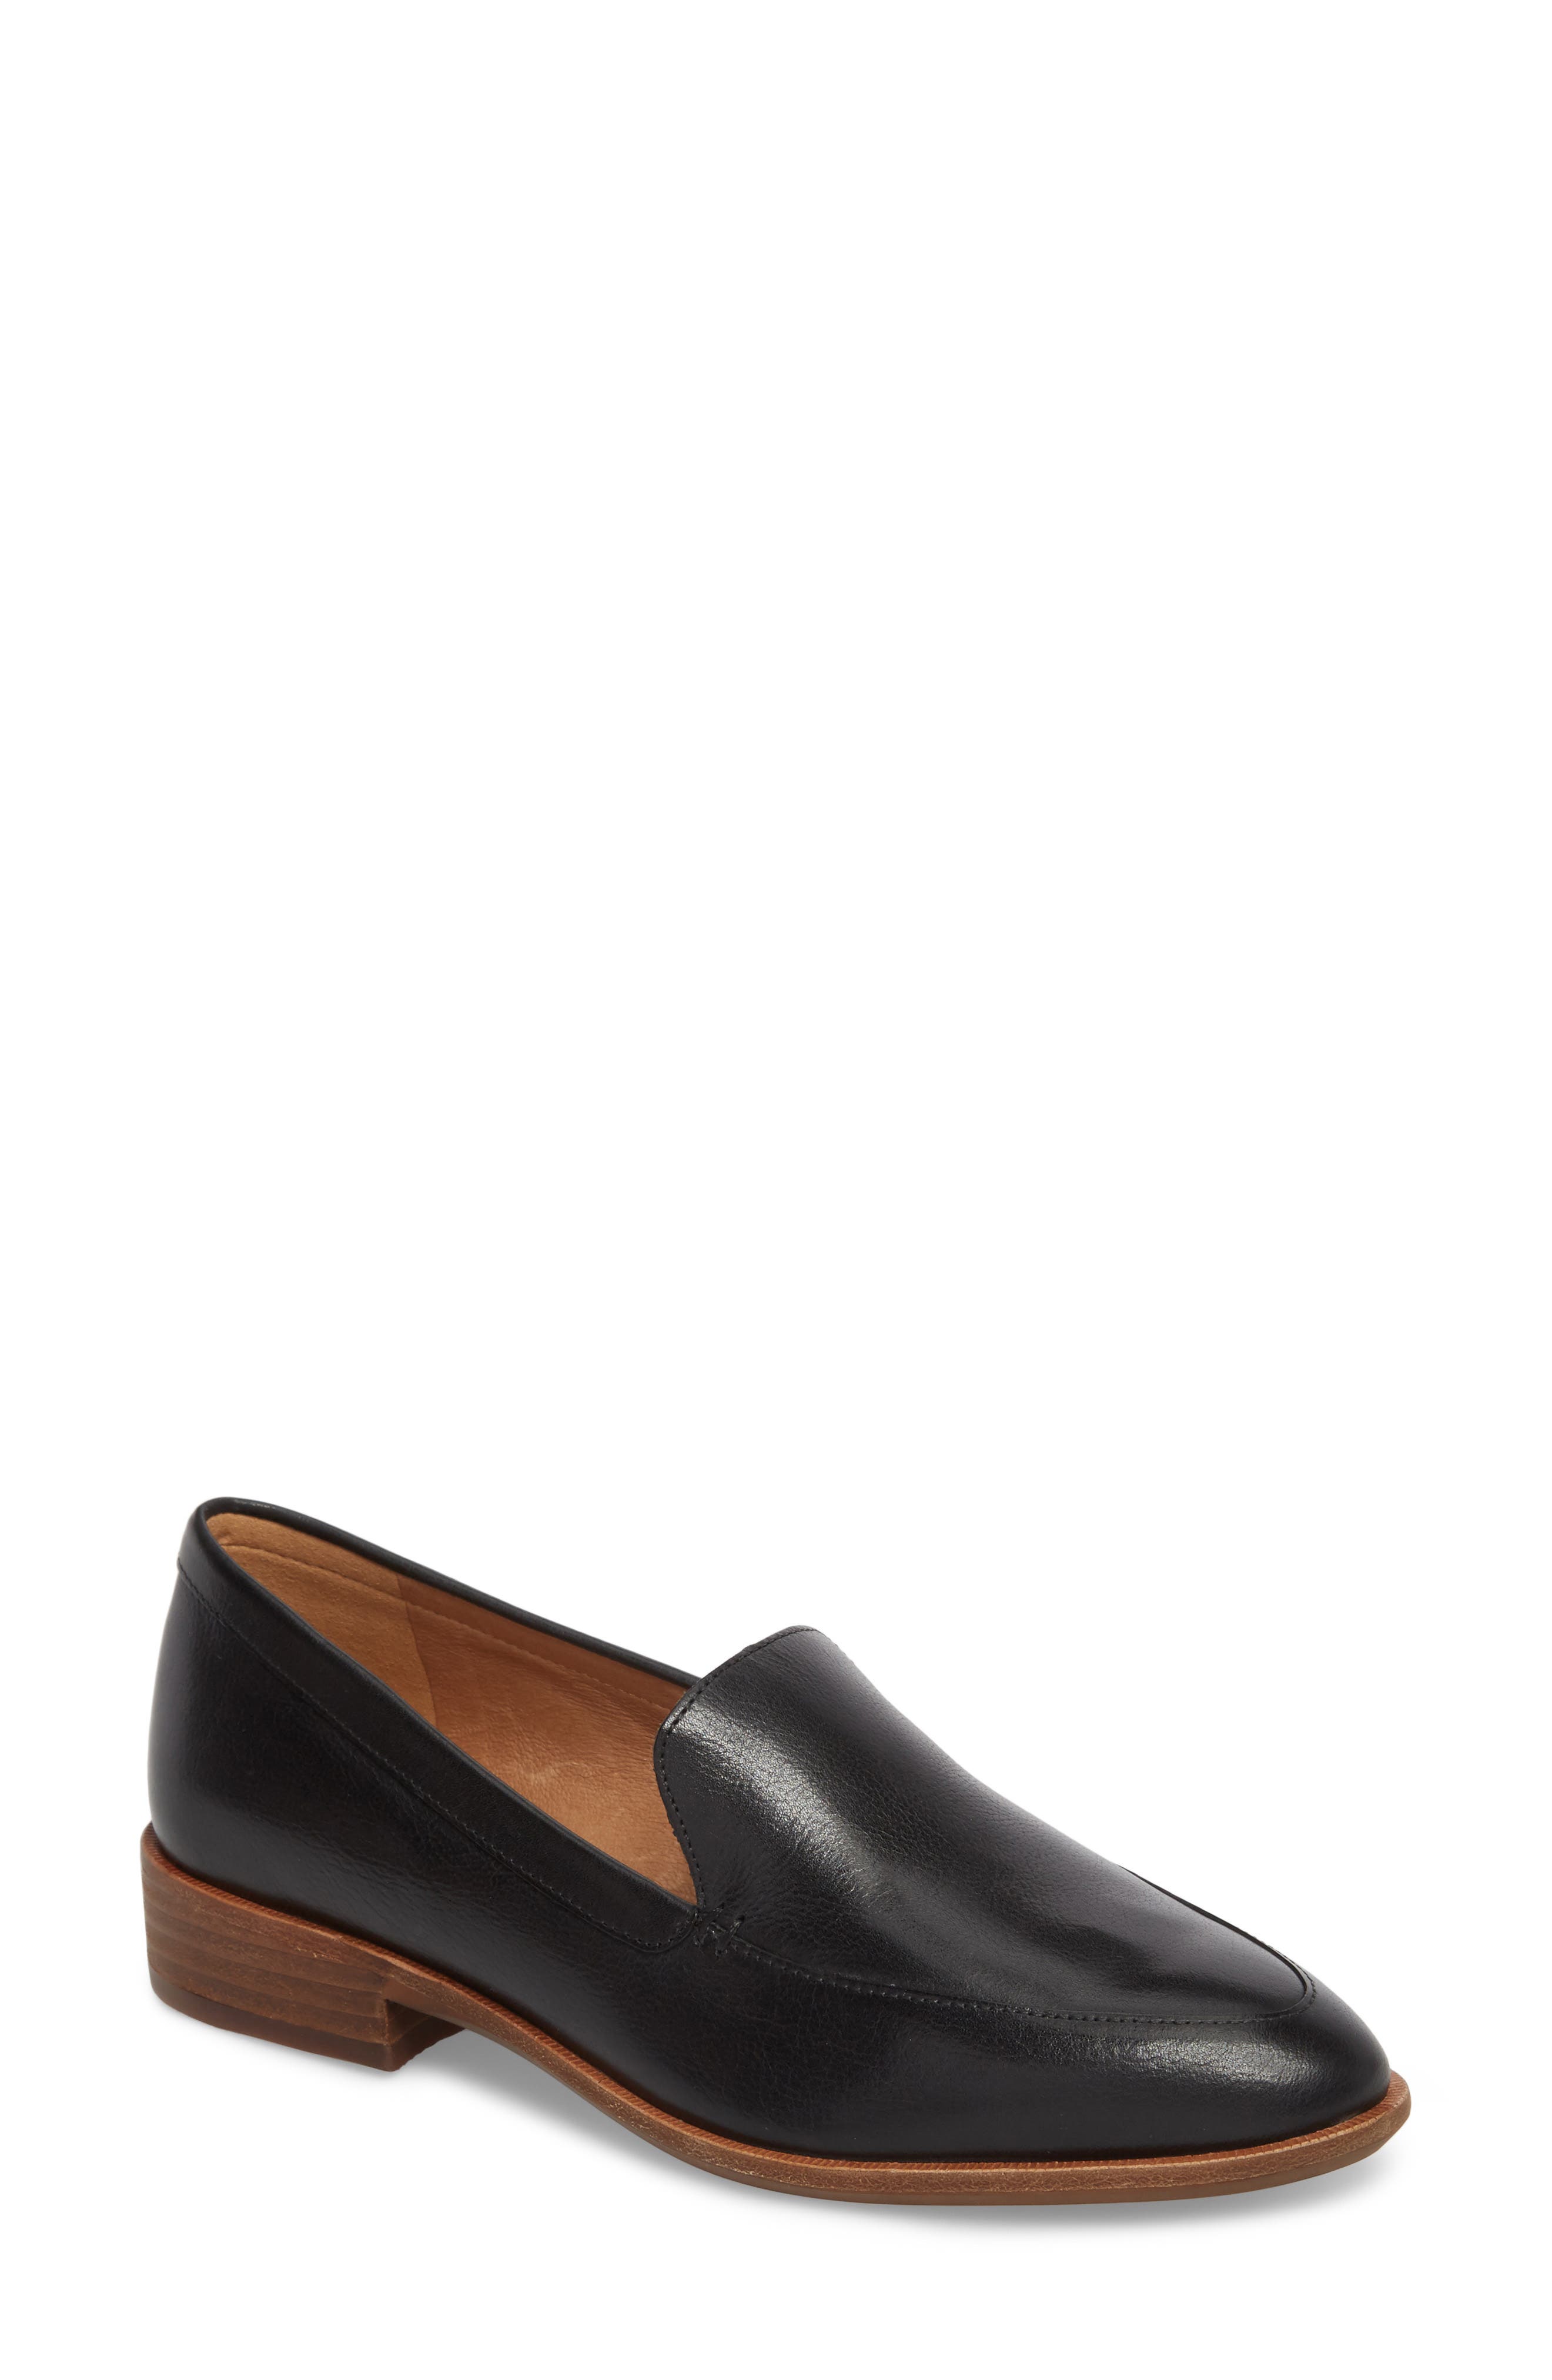 madewell shoes